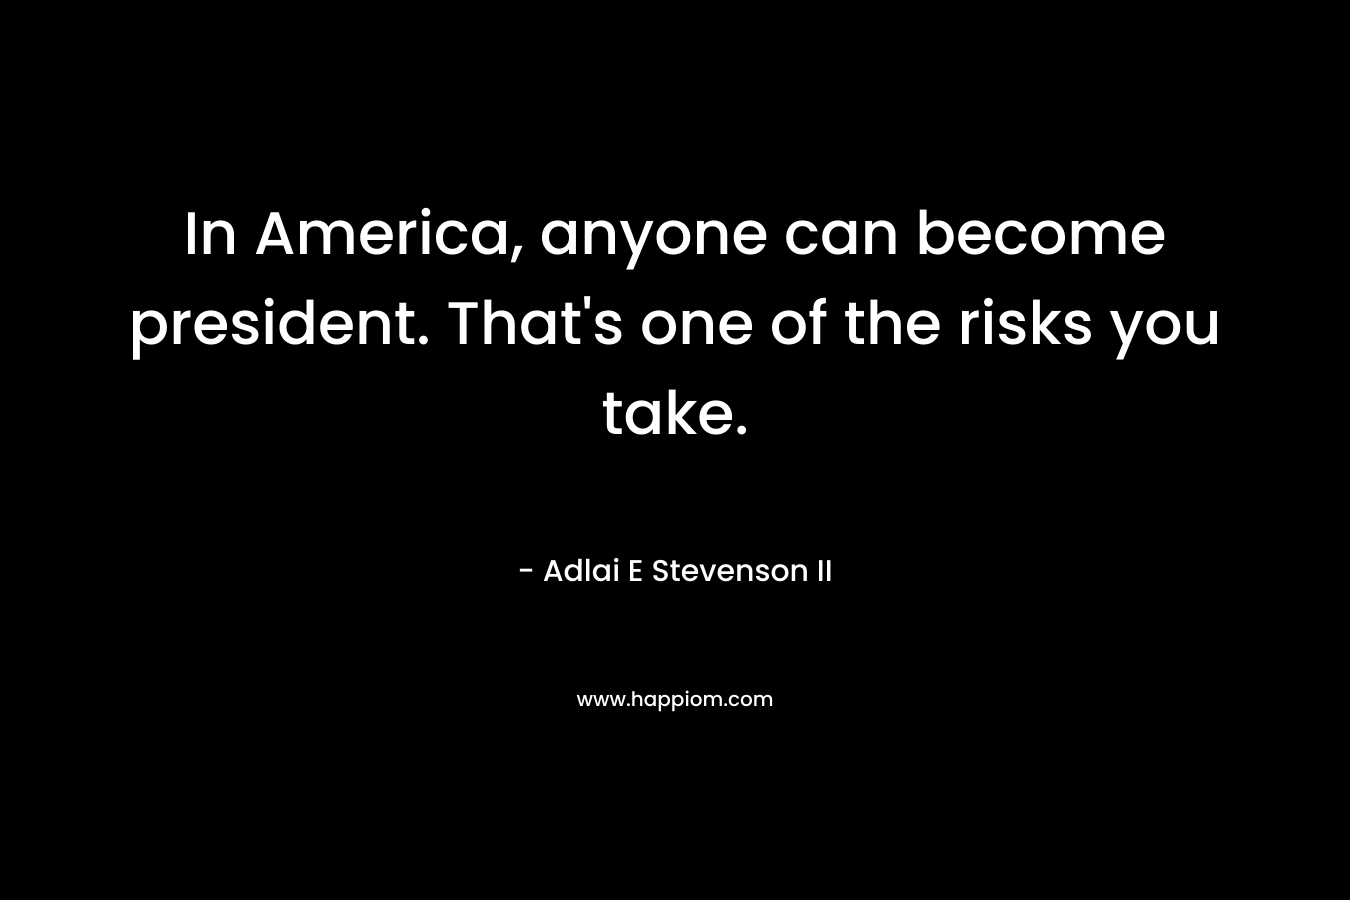 In America, anyone can become president. That’s one of the risks you take. – Adlai E Stevenson II